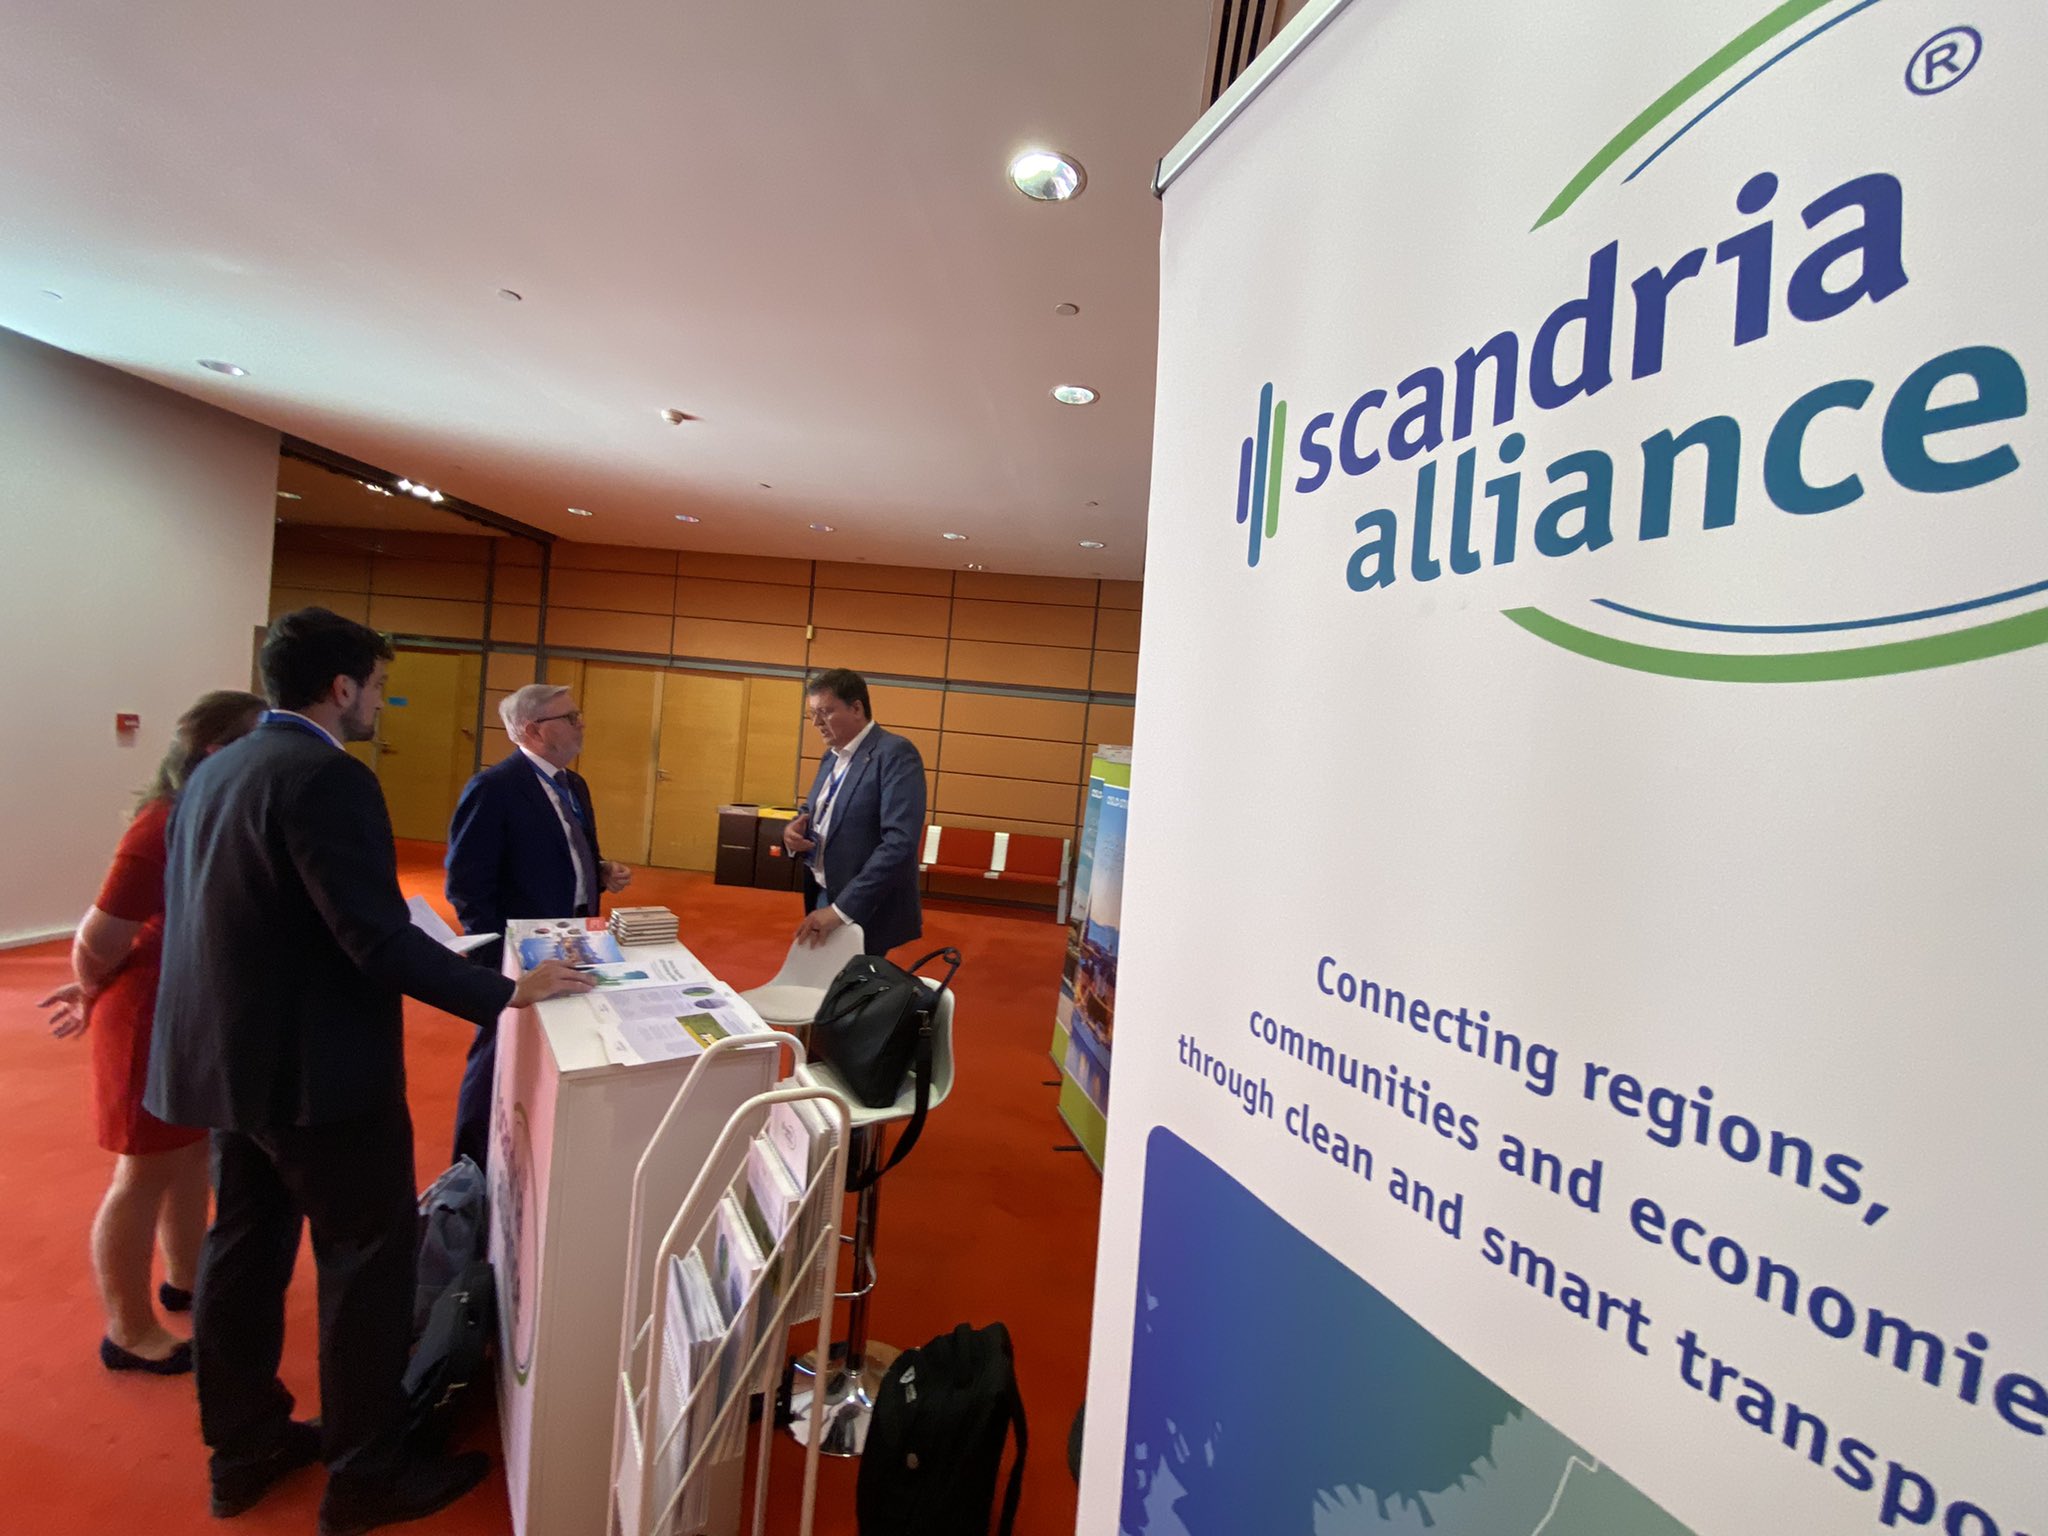 Scandria Alliance stand at the Connecting Europe Days in Lyon